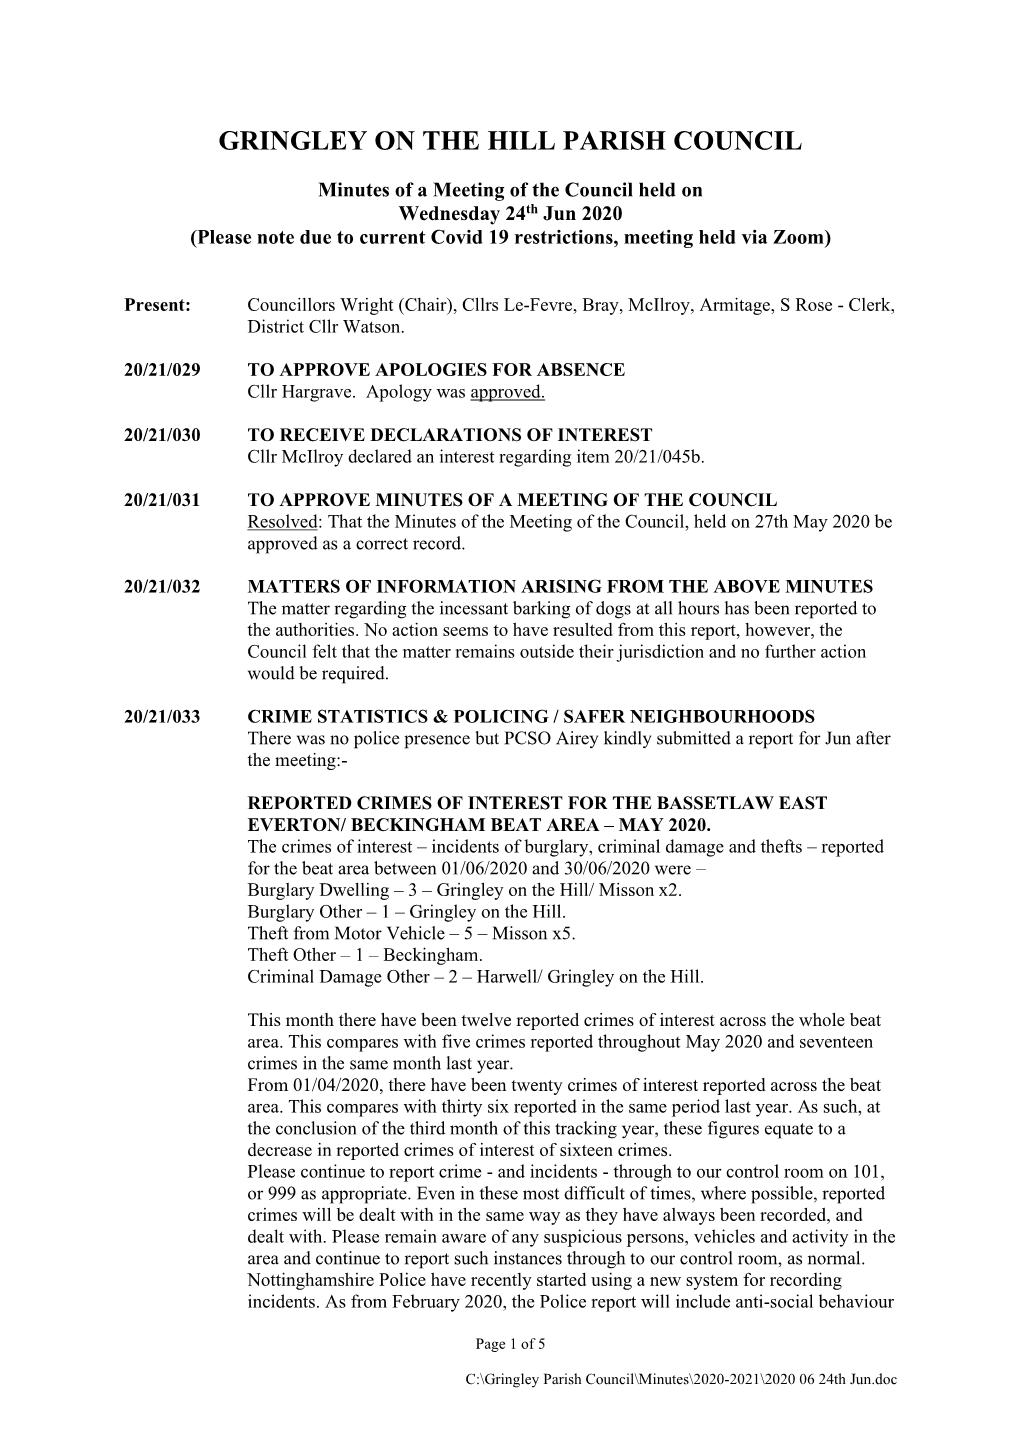 Minutes of a Meeting of the Council Held on Wednesday 24Th Jun 2020 (Please Note Due to Current Covid 19 Restrictions, Meeting Held Via Zoom)